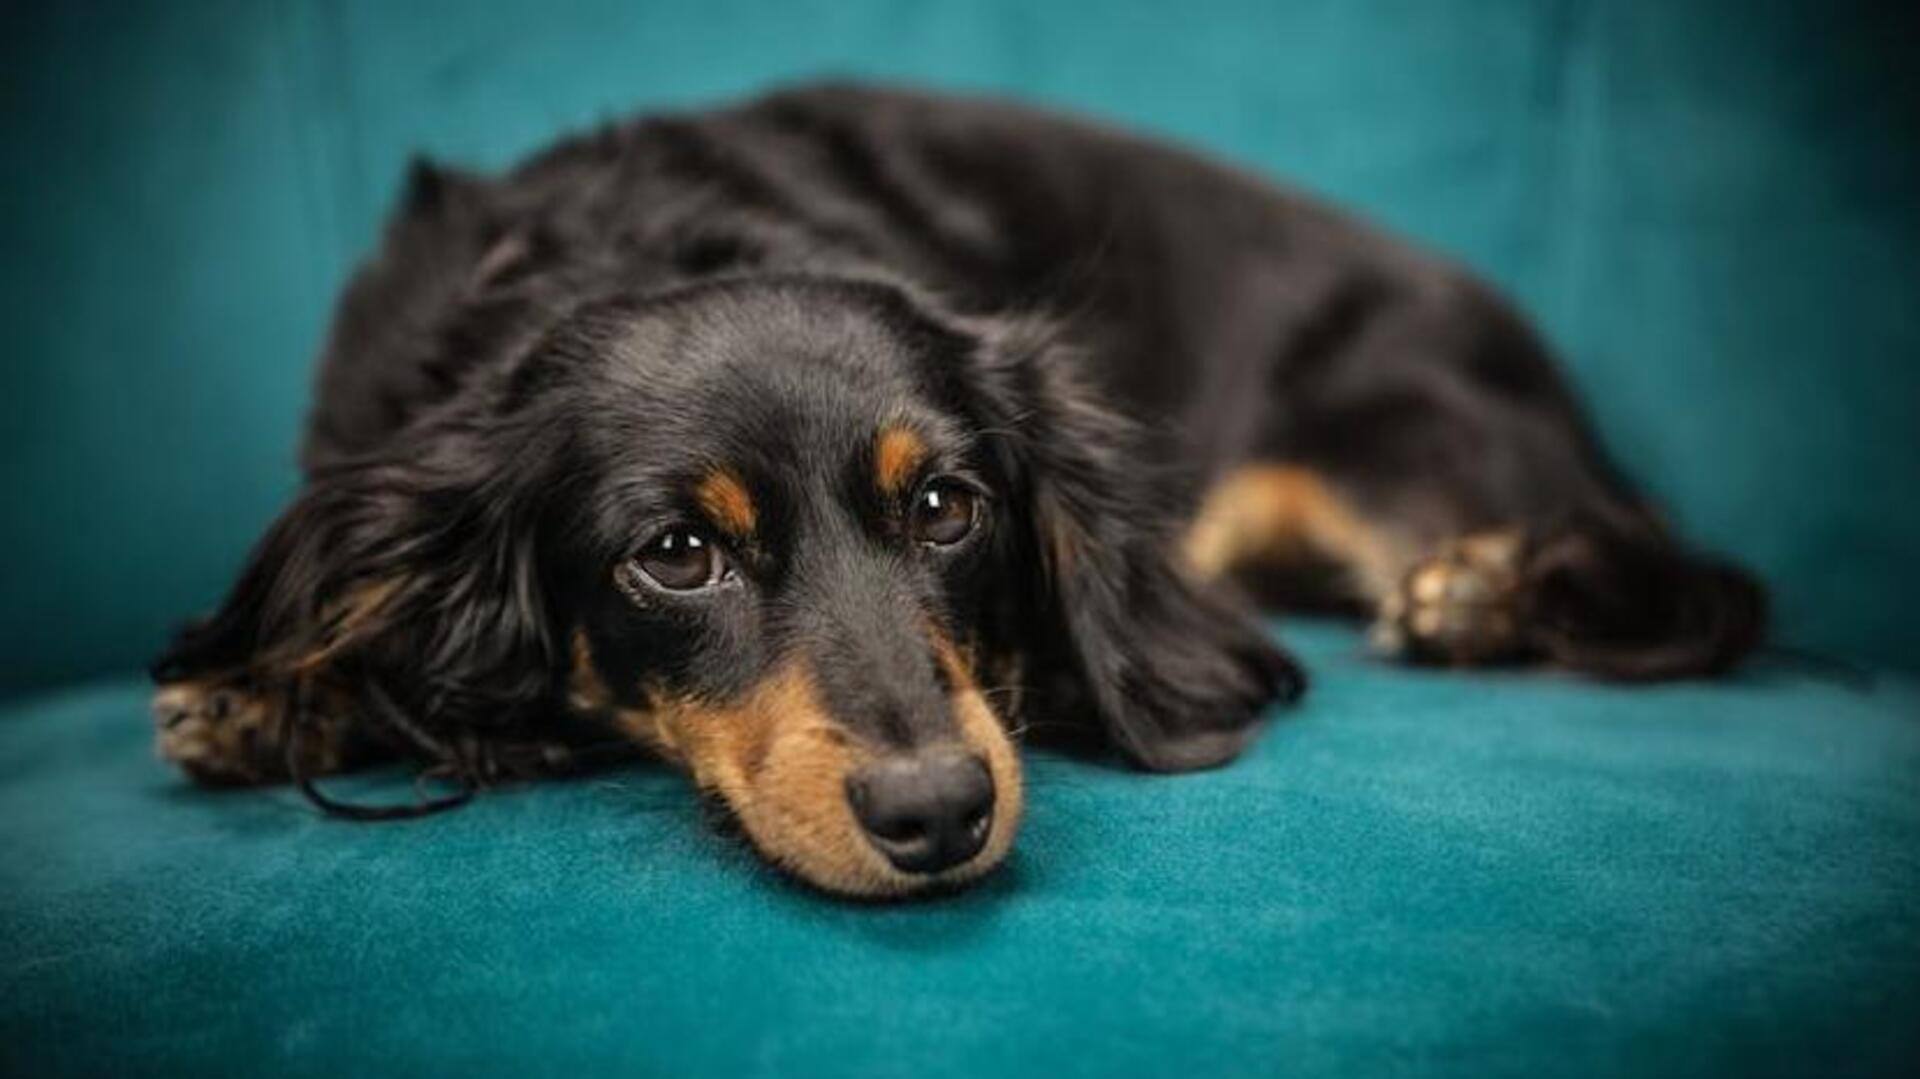 Take note of Dachshund's spinal care essentials